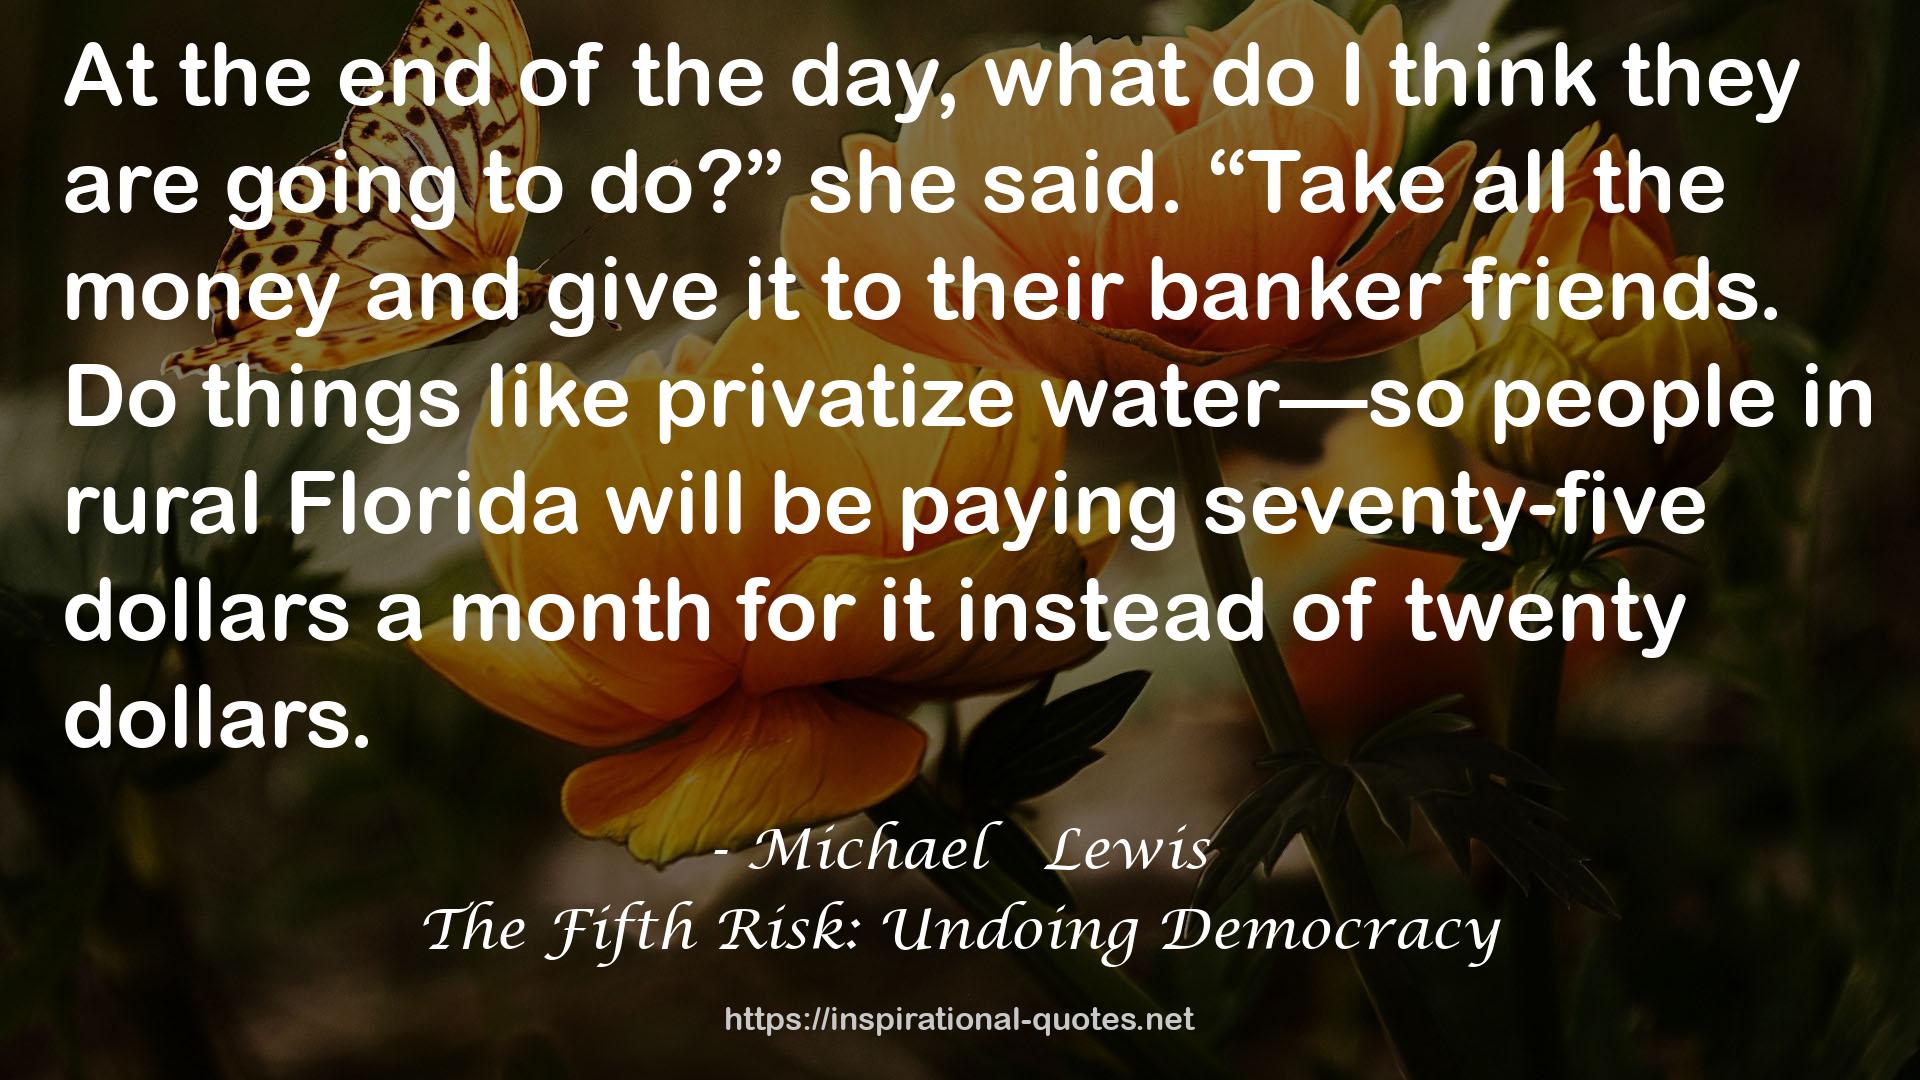 The Fifth Risk: Undoing Democracy QUOTES